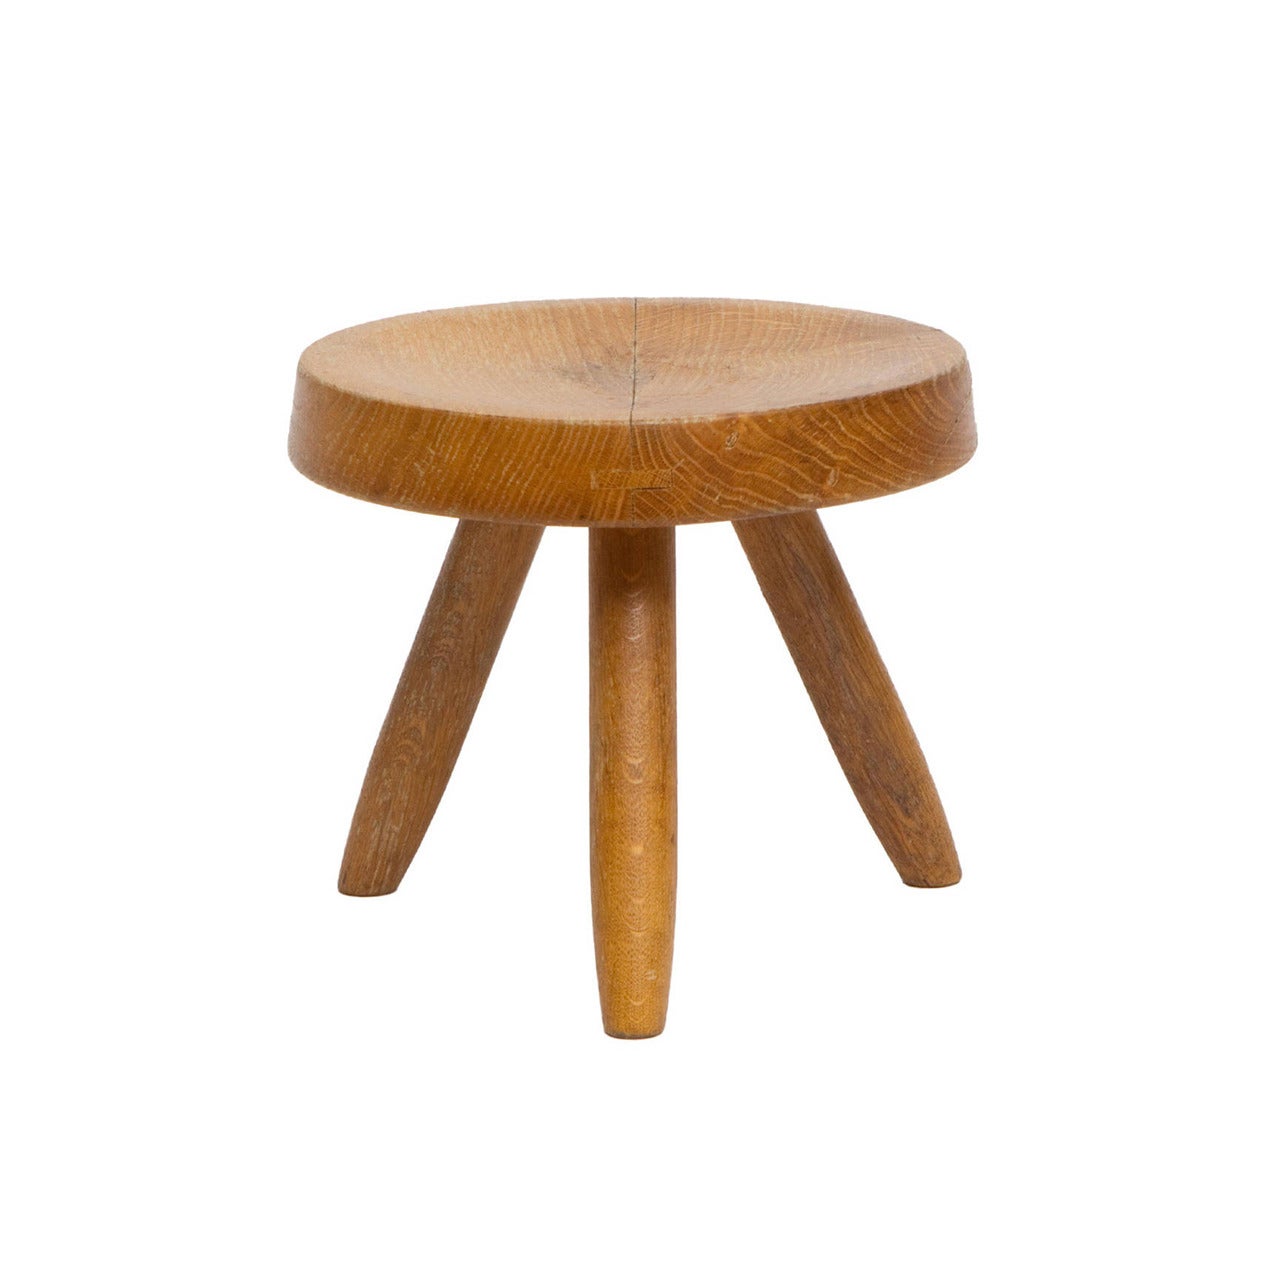 Charlotte Perriand Wooden Stool, circa 1950